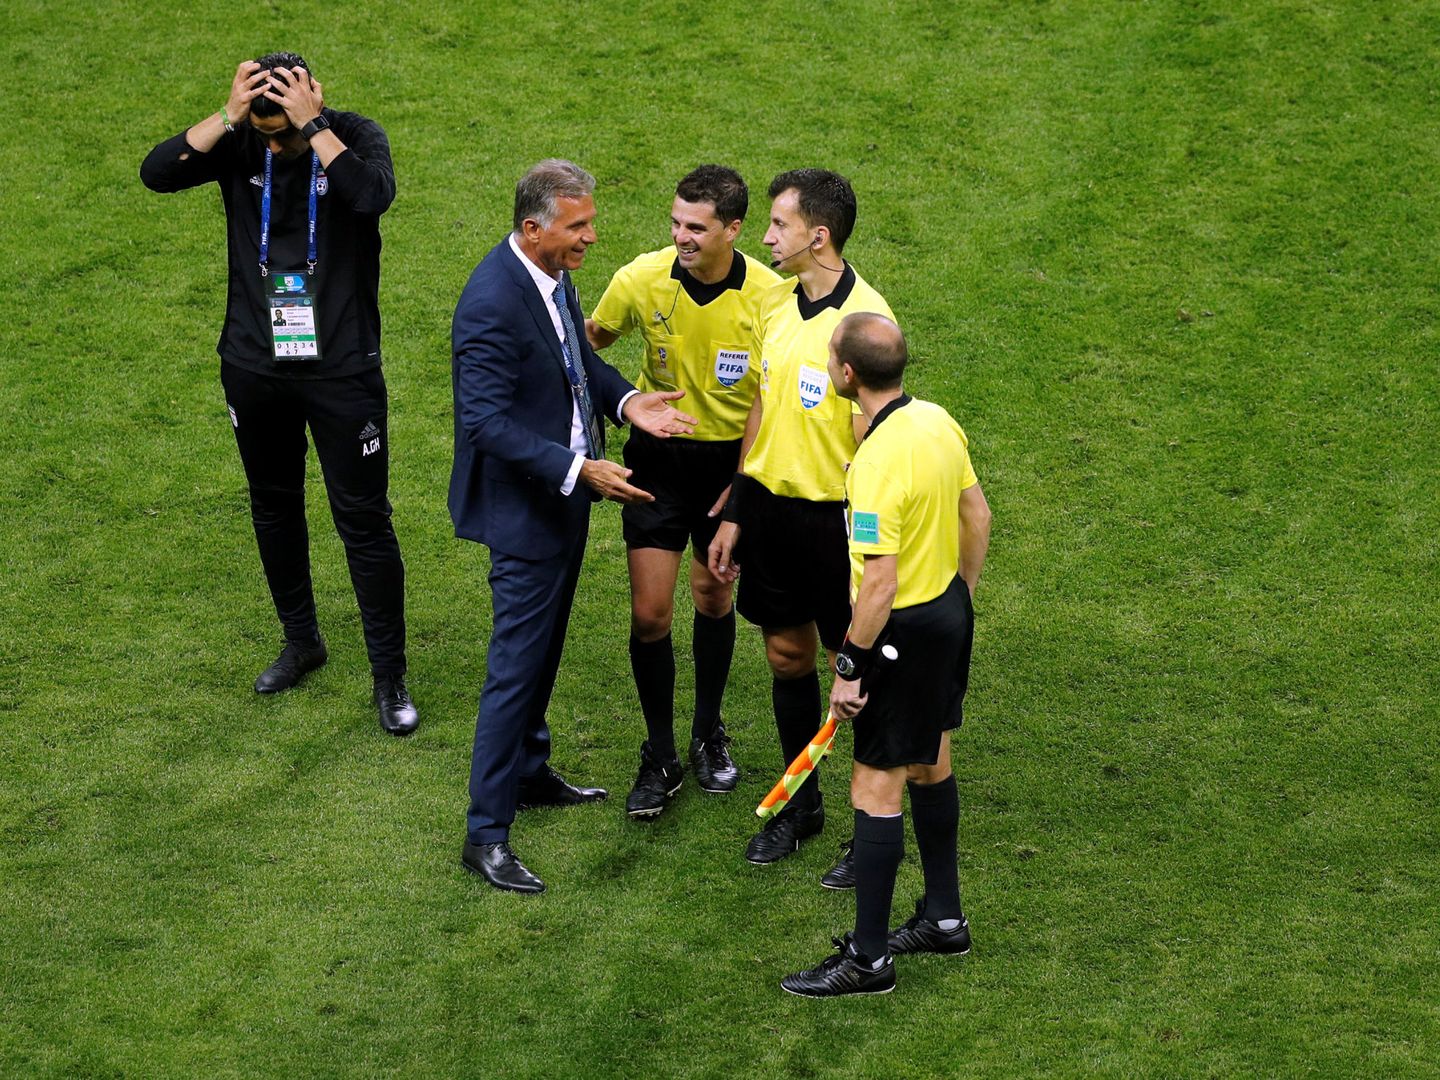 Soccer Football - World Cup - Group B - Iran vs Spain - Kazan Arena, Kazan, Russia - June 20, 2018   Iran coach Carlos Queiroz speaks with referee Andres Cunha and match officials after the match      REUTERS John Sibley